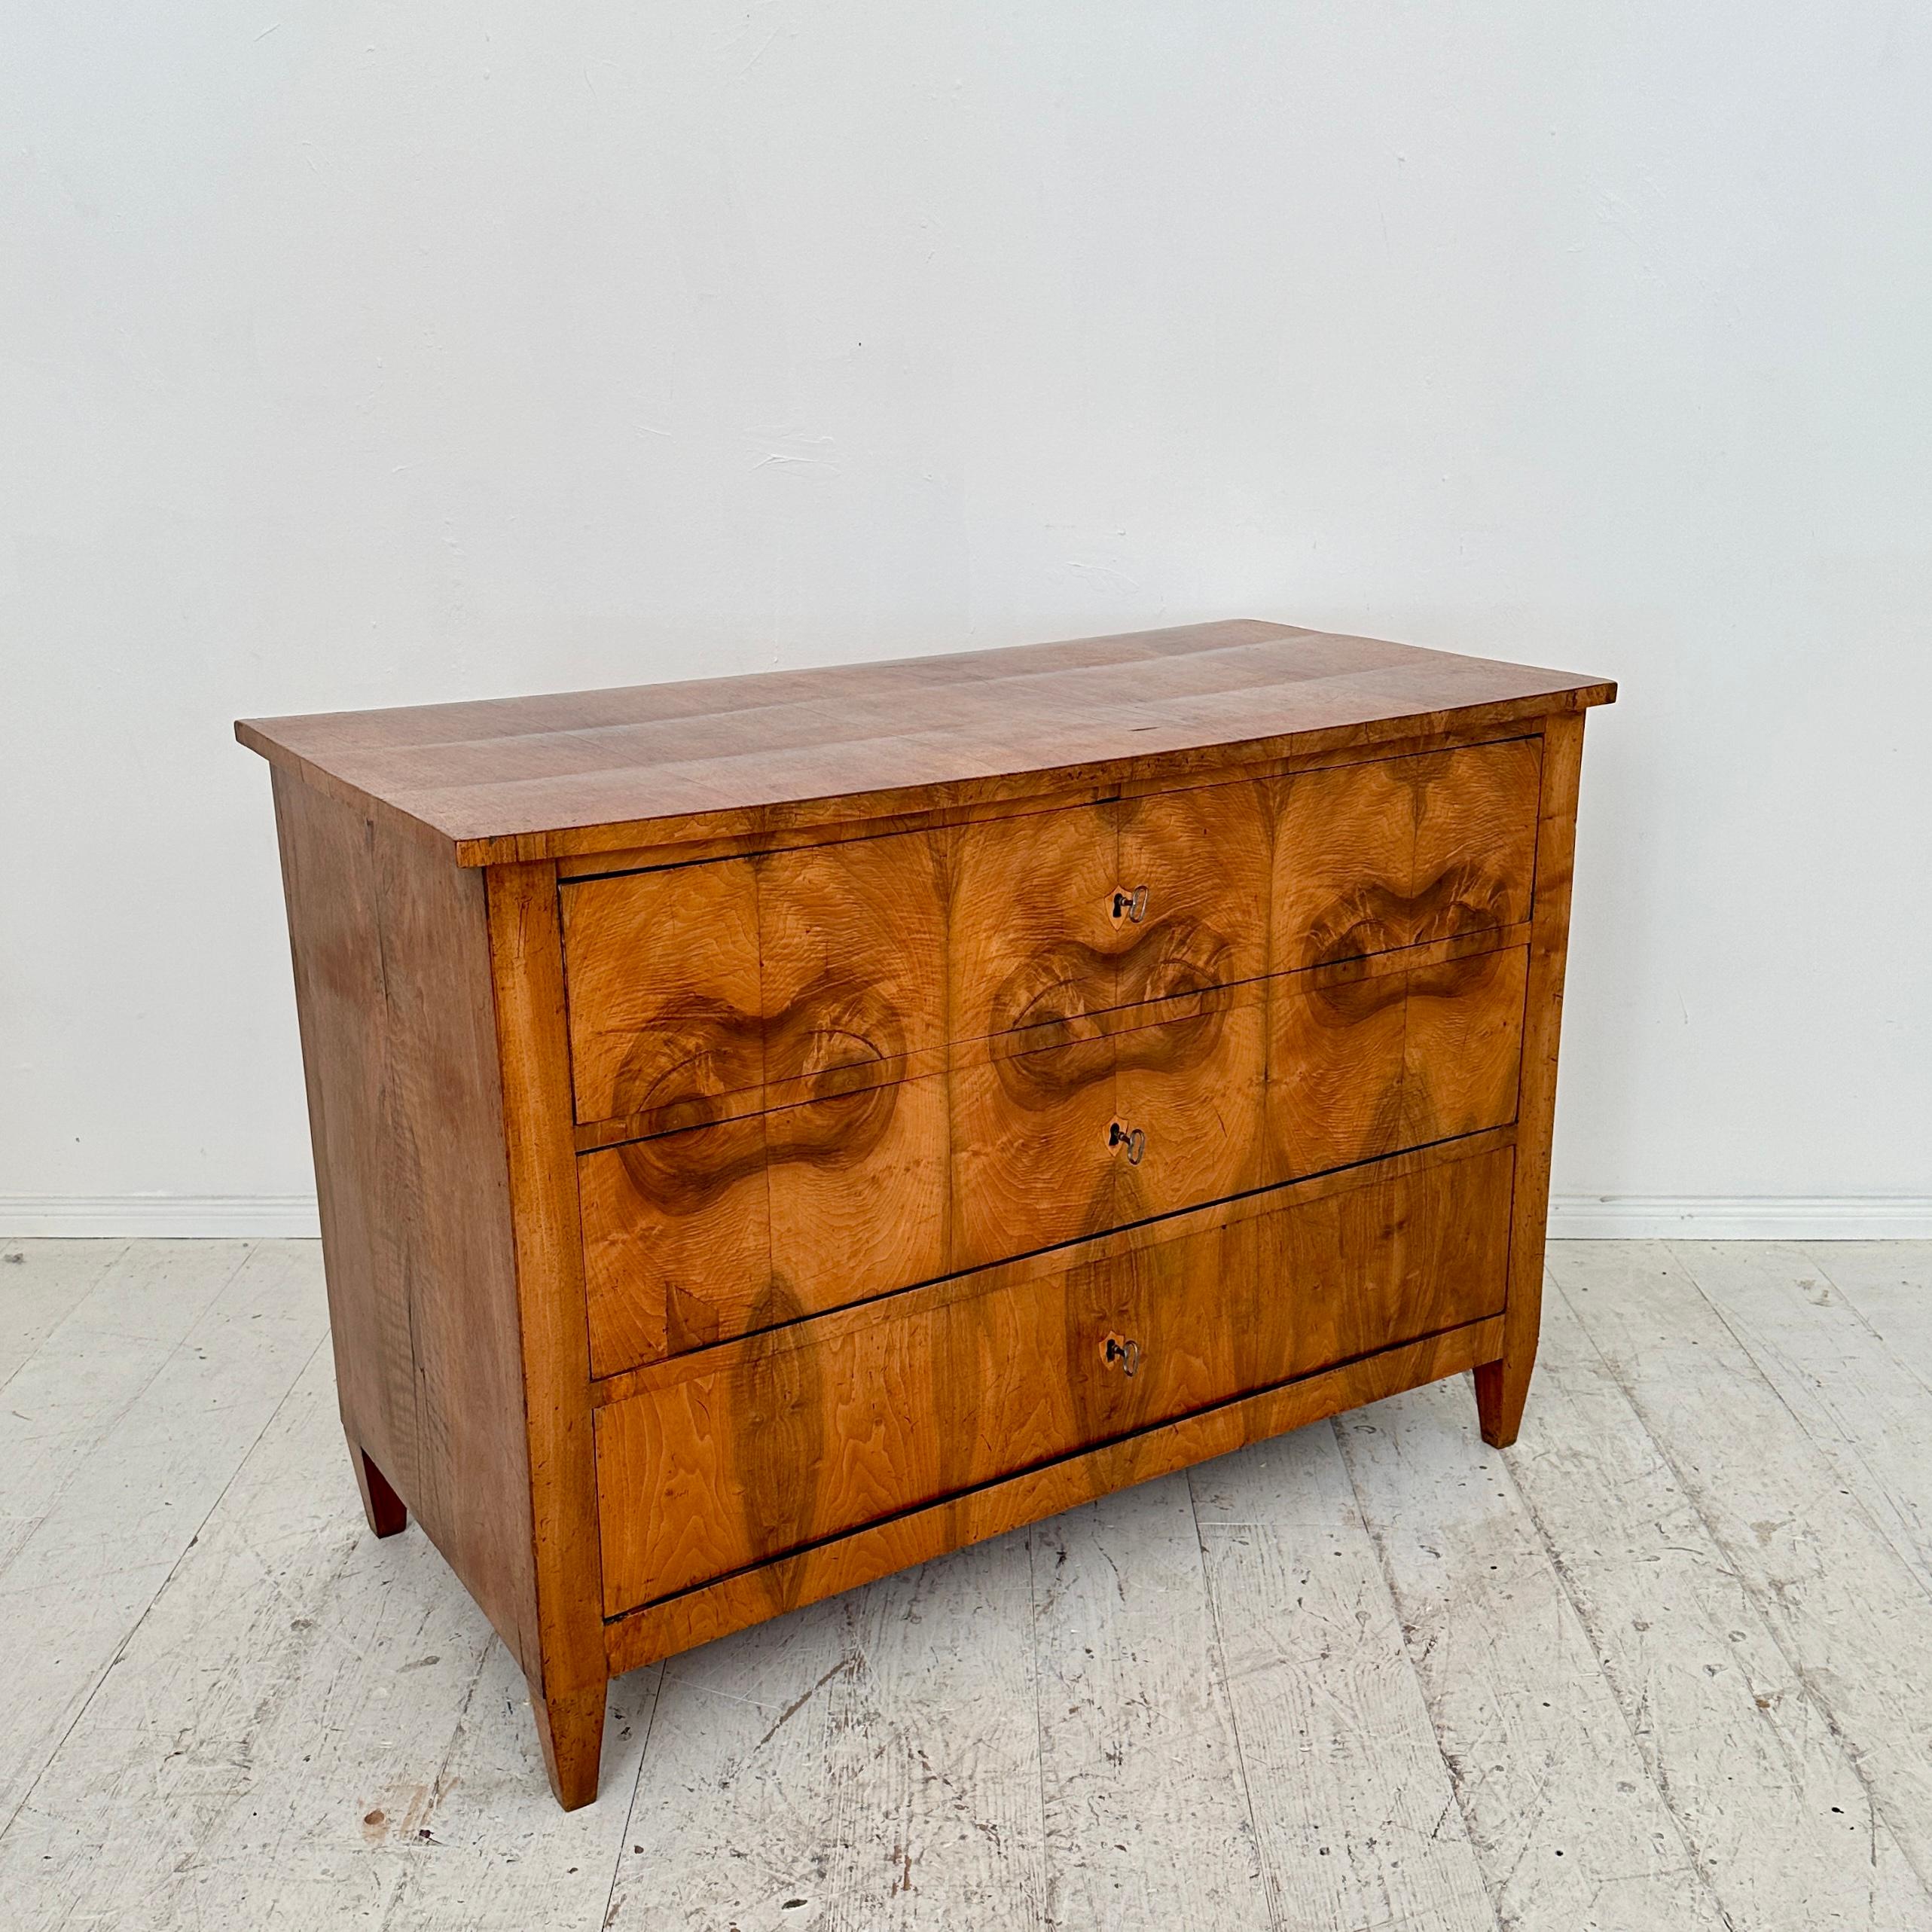 19th Century German Biedermeier Chest of Drawers in Walnut with 3 Drawers, 1820 For Sale 9